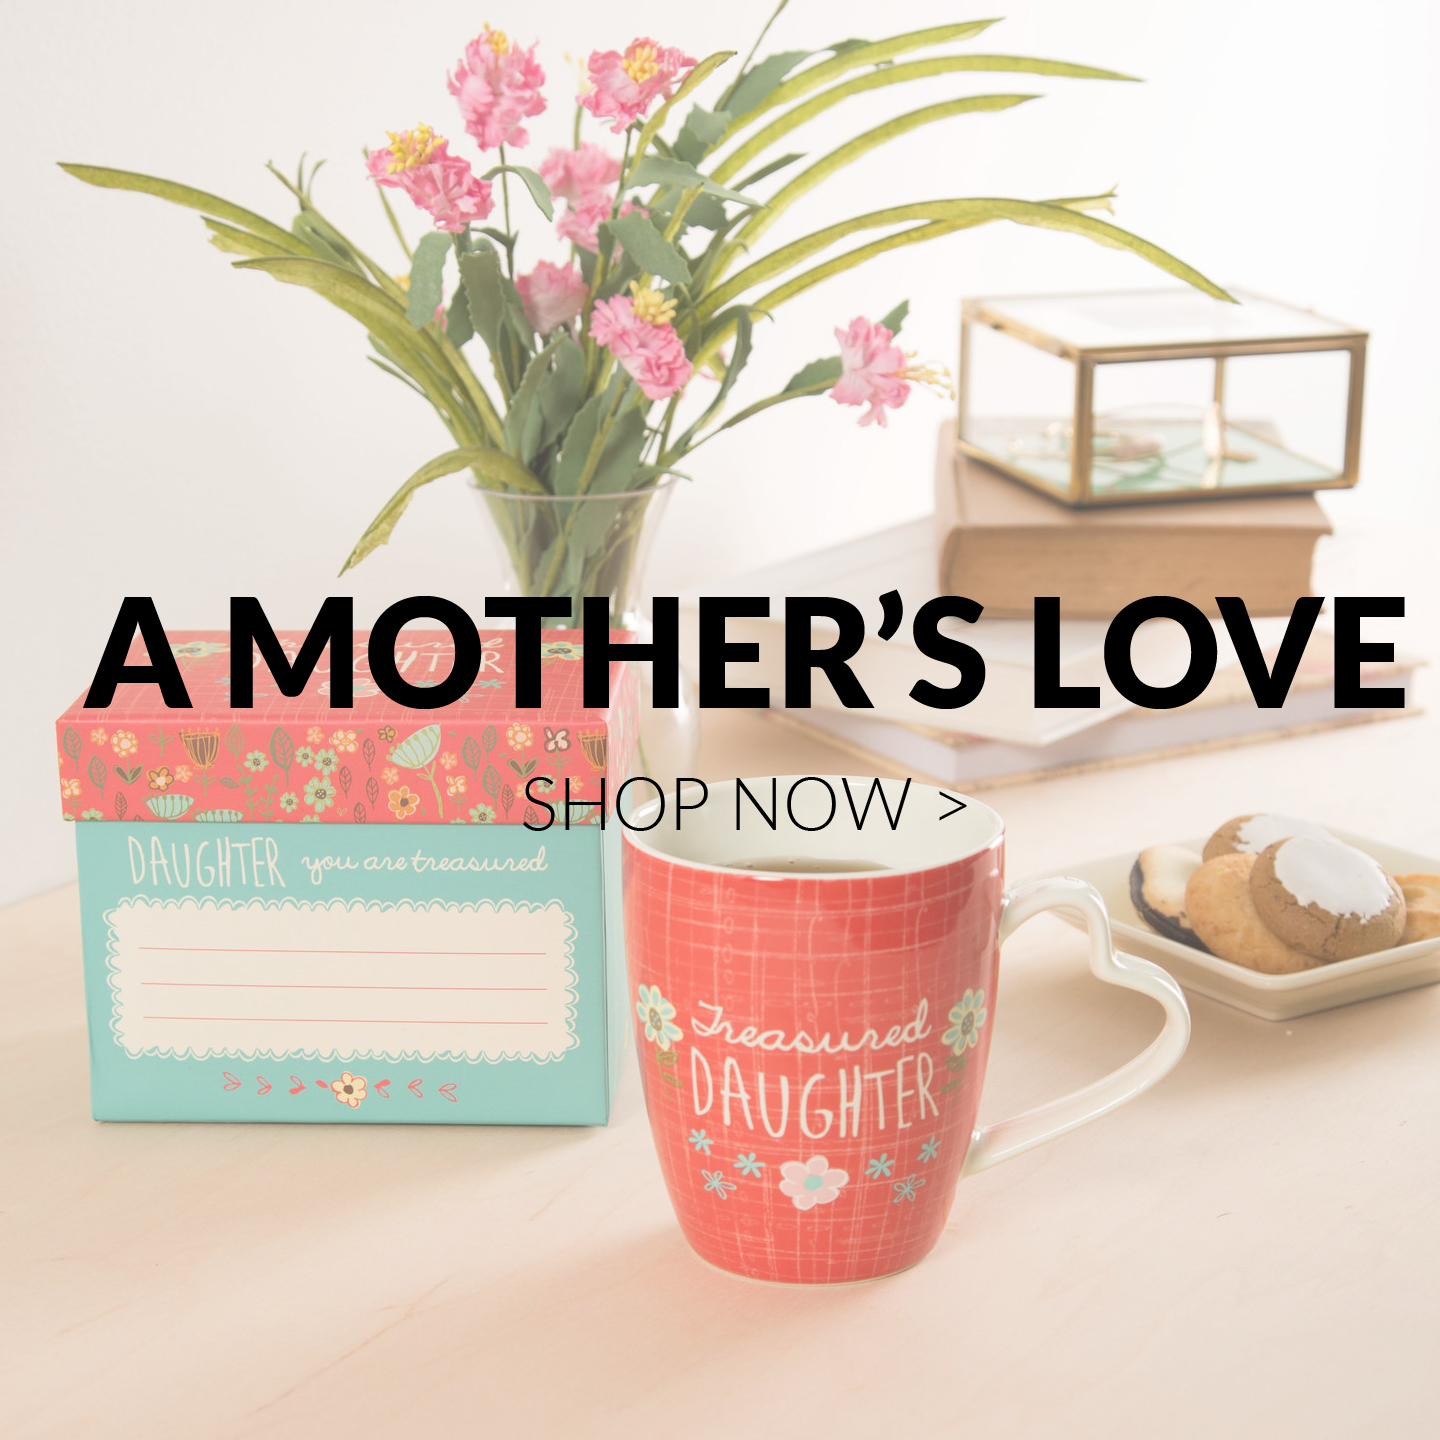 A Mother's Love by Amylee Weeks